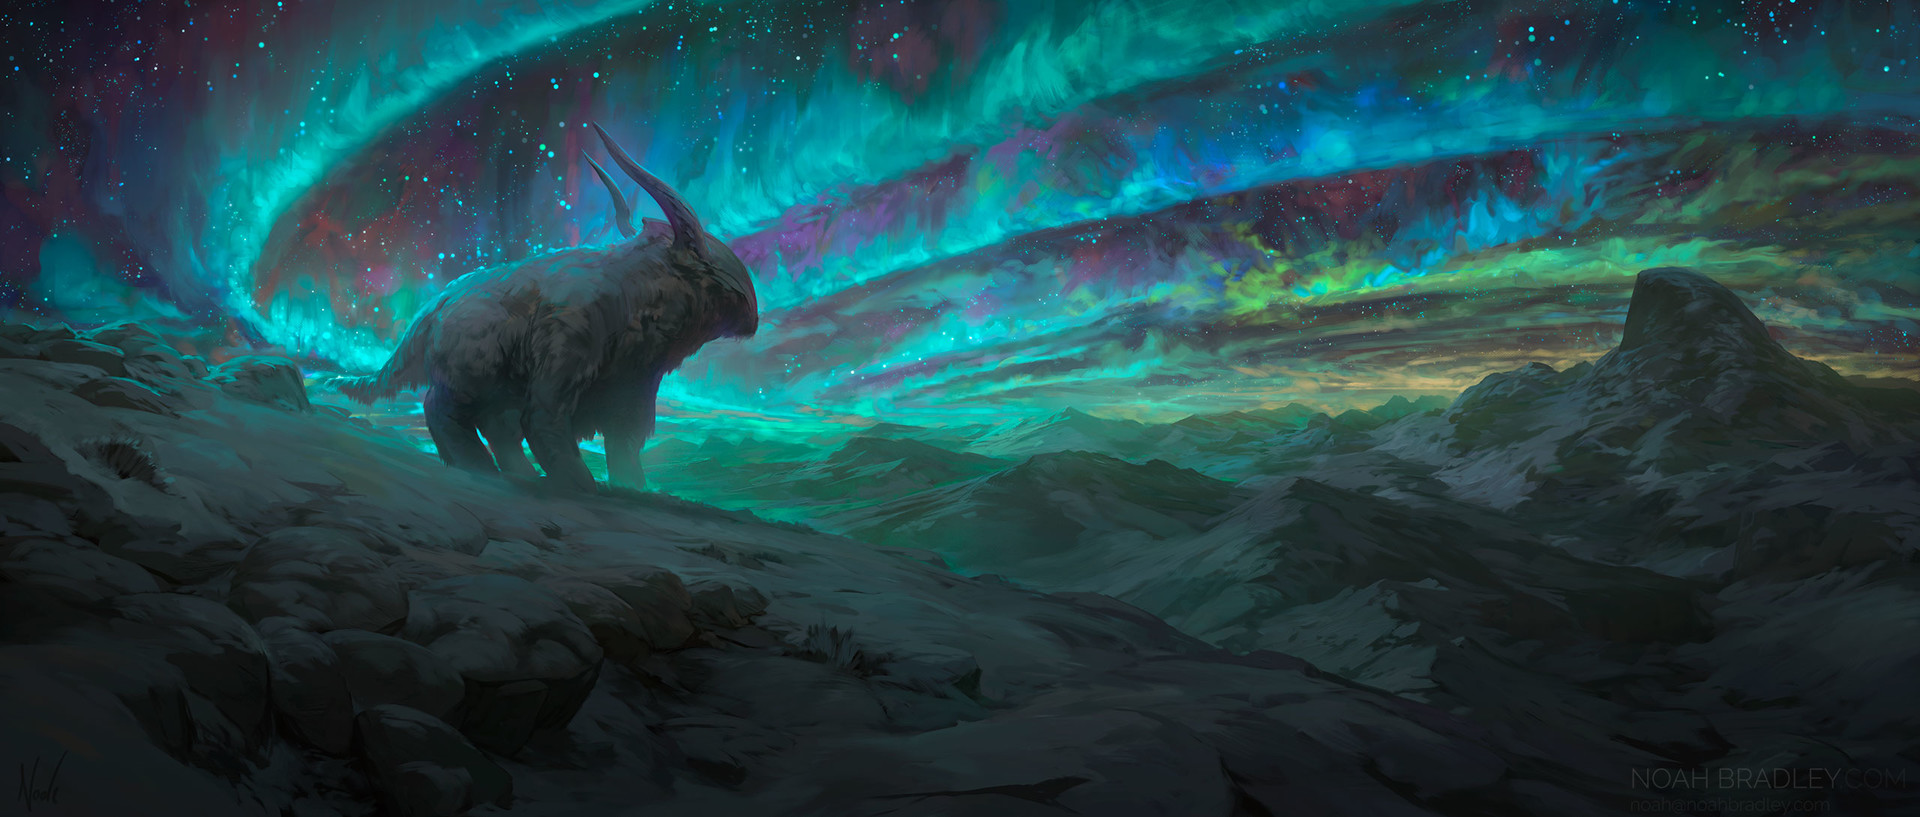 Noah Bradley Digital Painting Illustration Echoes of Another Life